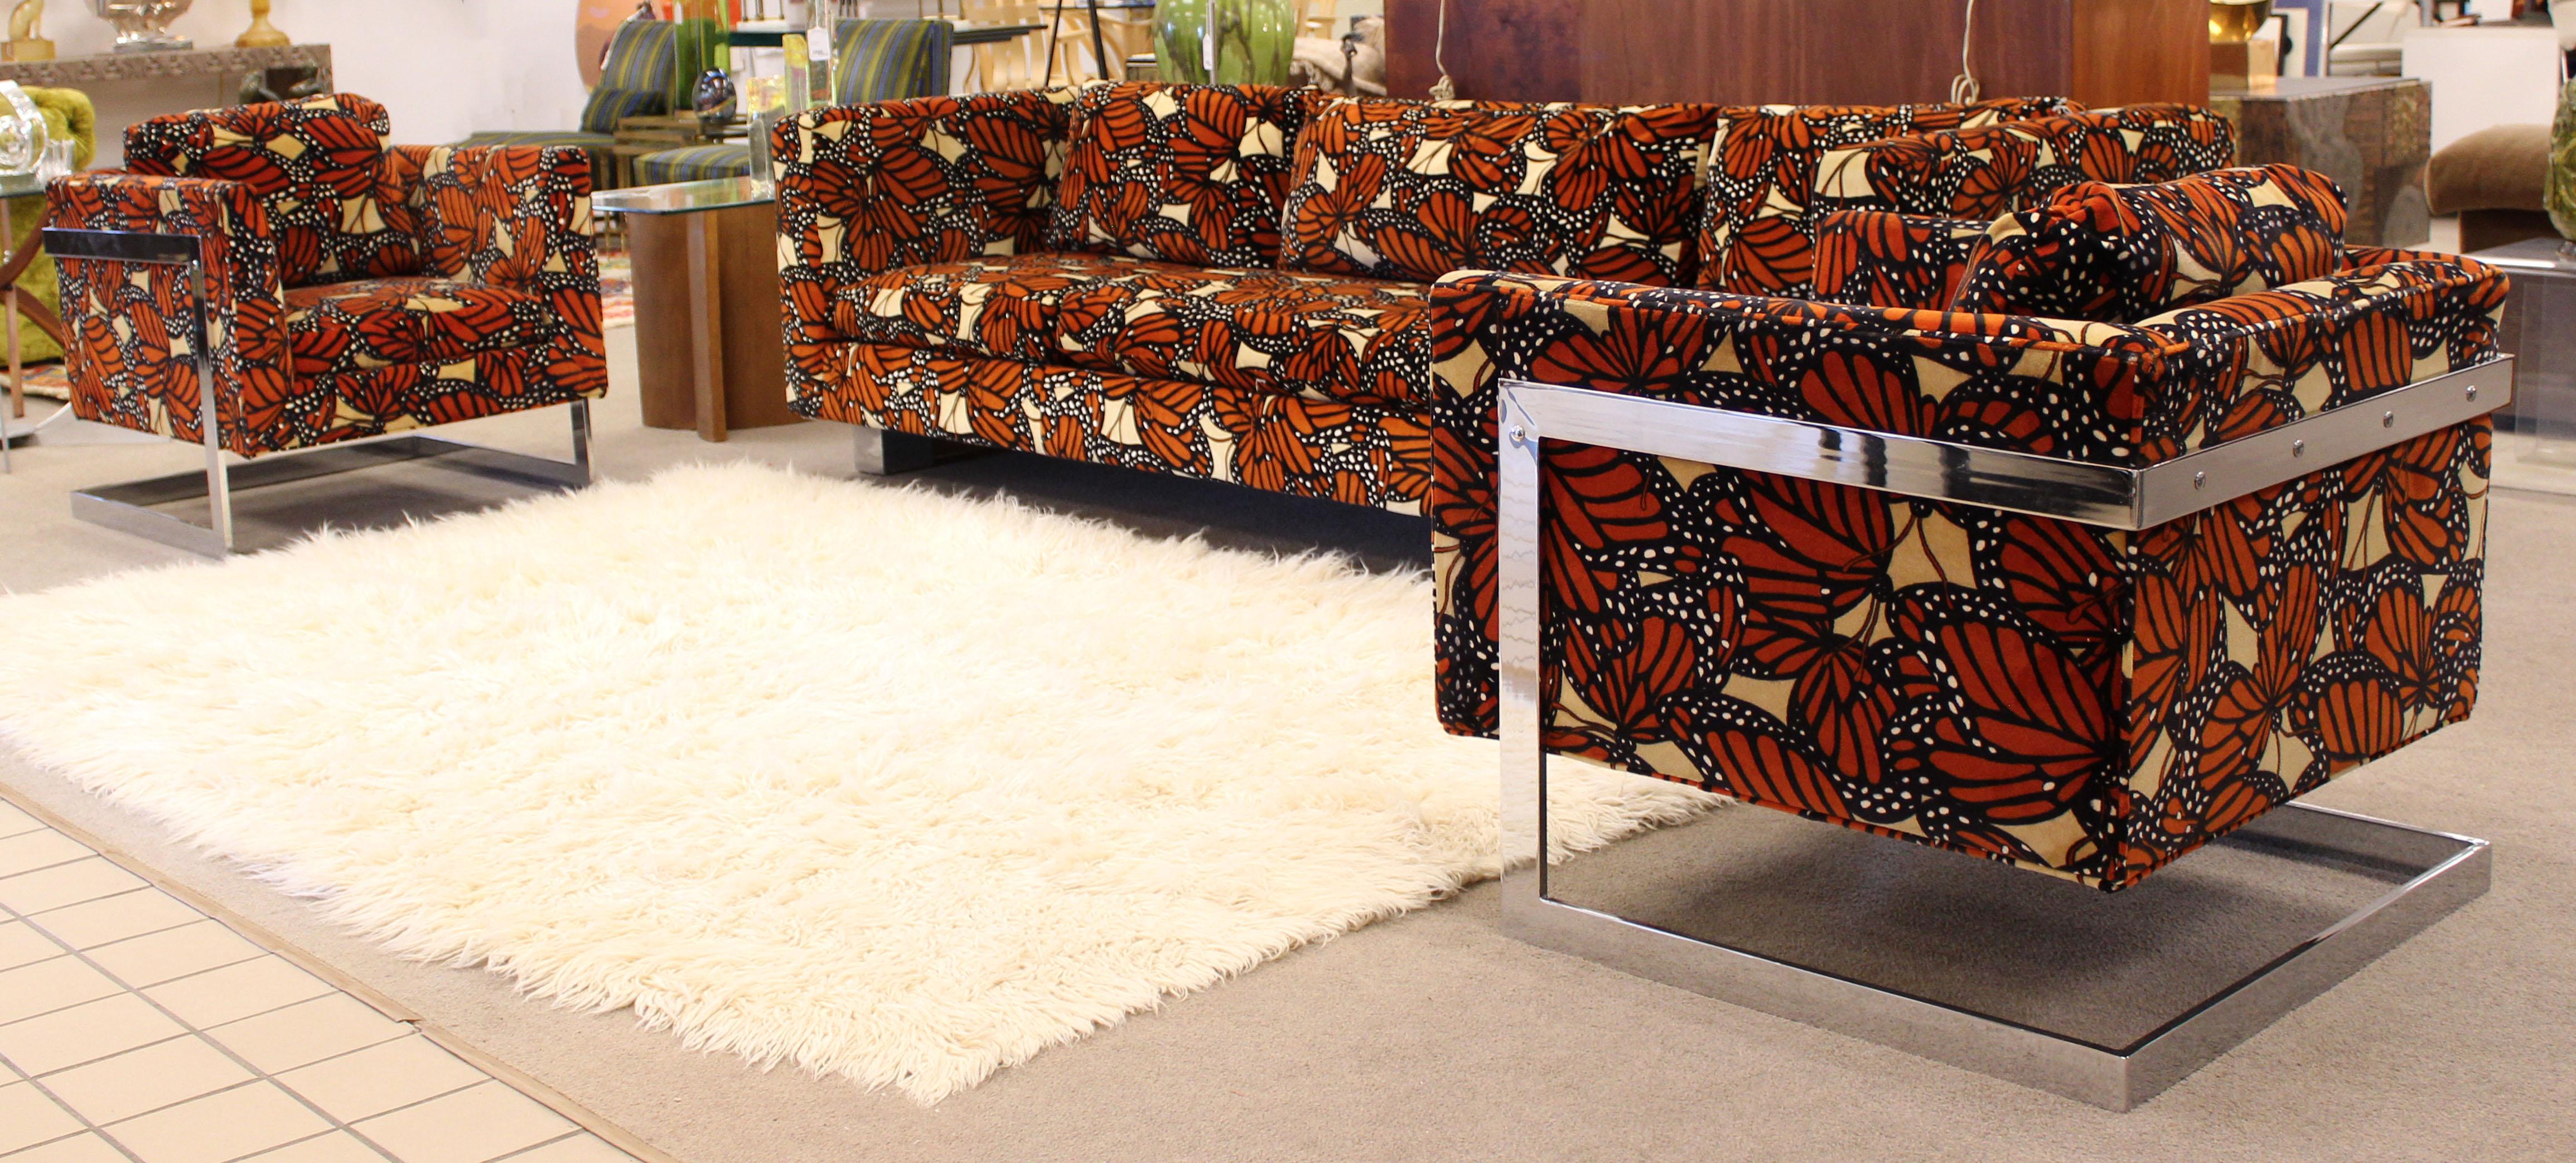 For your consideration is a radiant sofa and pair of lounge chairs set, by Milo Baughman, with a rich and rare Jack Lenor Larsen Monarch butterfly fabric, circa the 1970s. In excellent condition. The dimensions of the sofa are 96